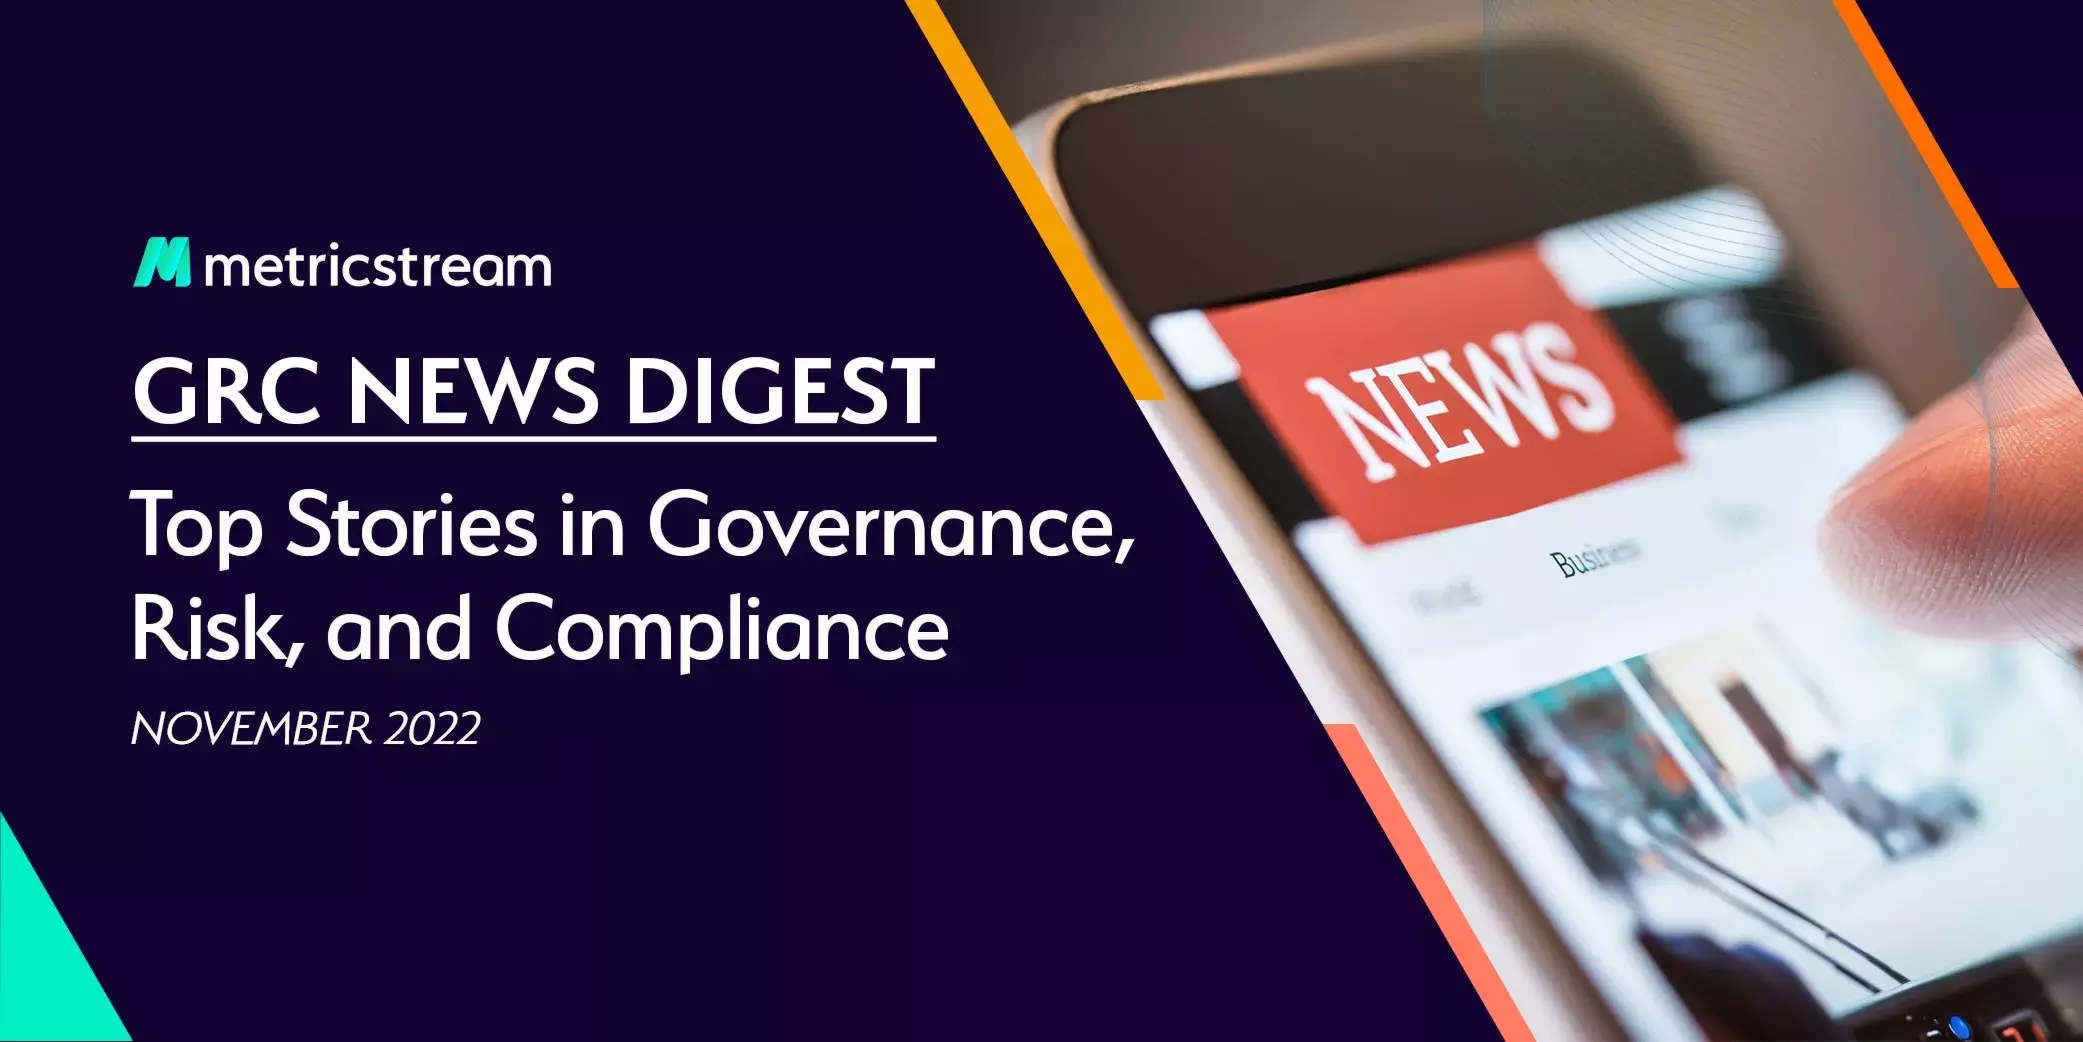 GRC News Digest November 2022 – Top Stories in Governance, Risk, and Compliance